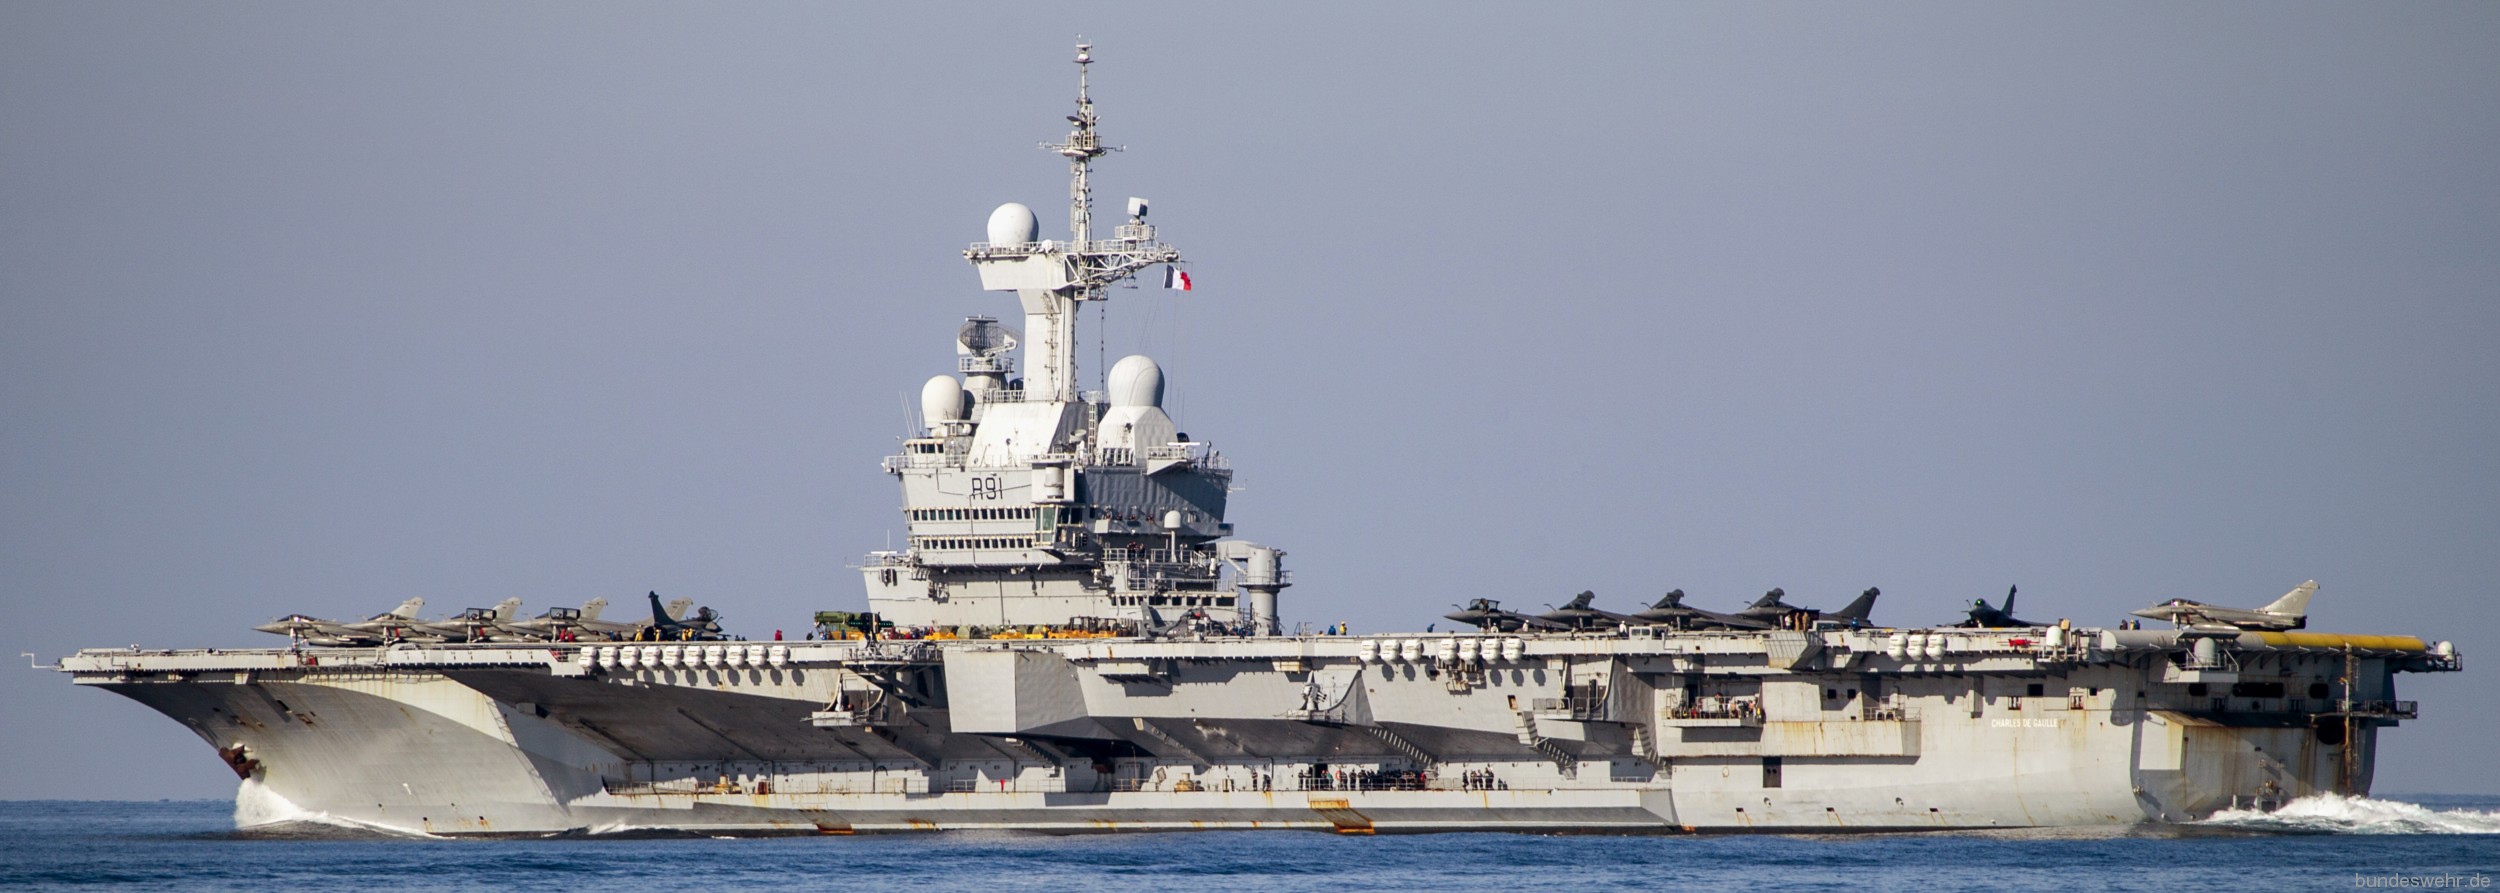  r-91 fs charles de gaulle aircraft carrier french navy 04